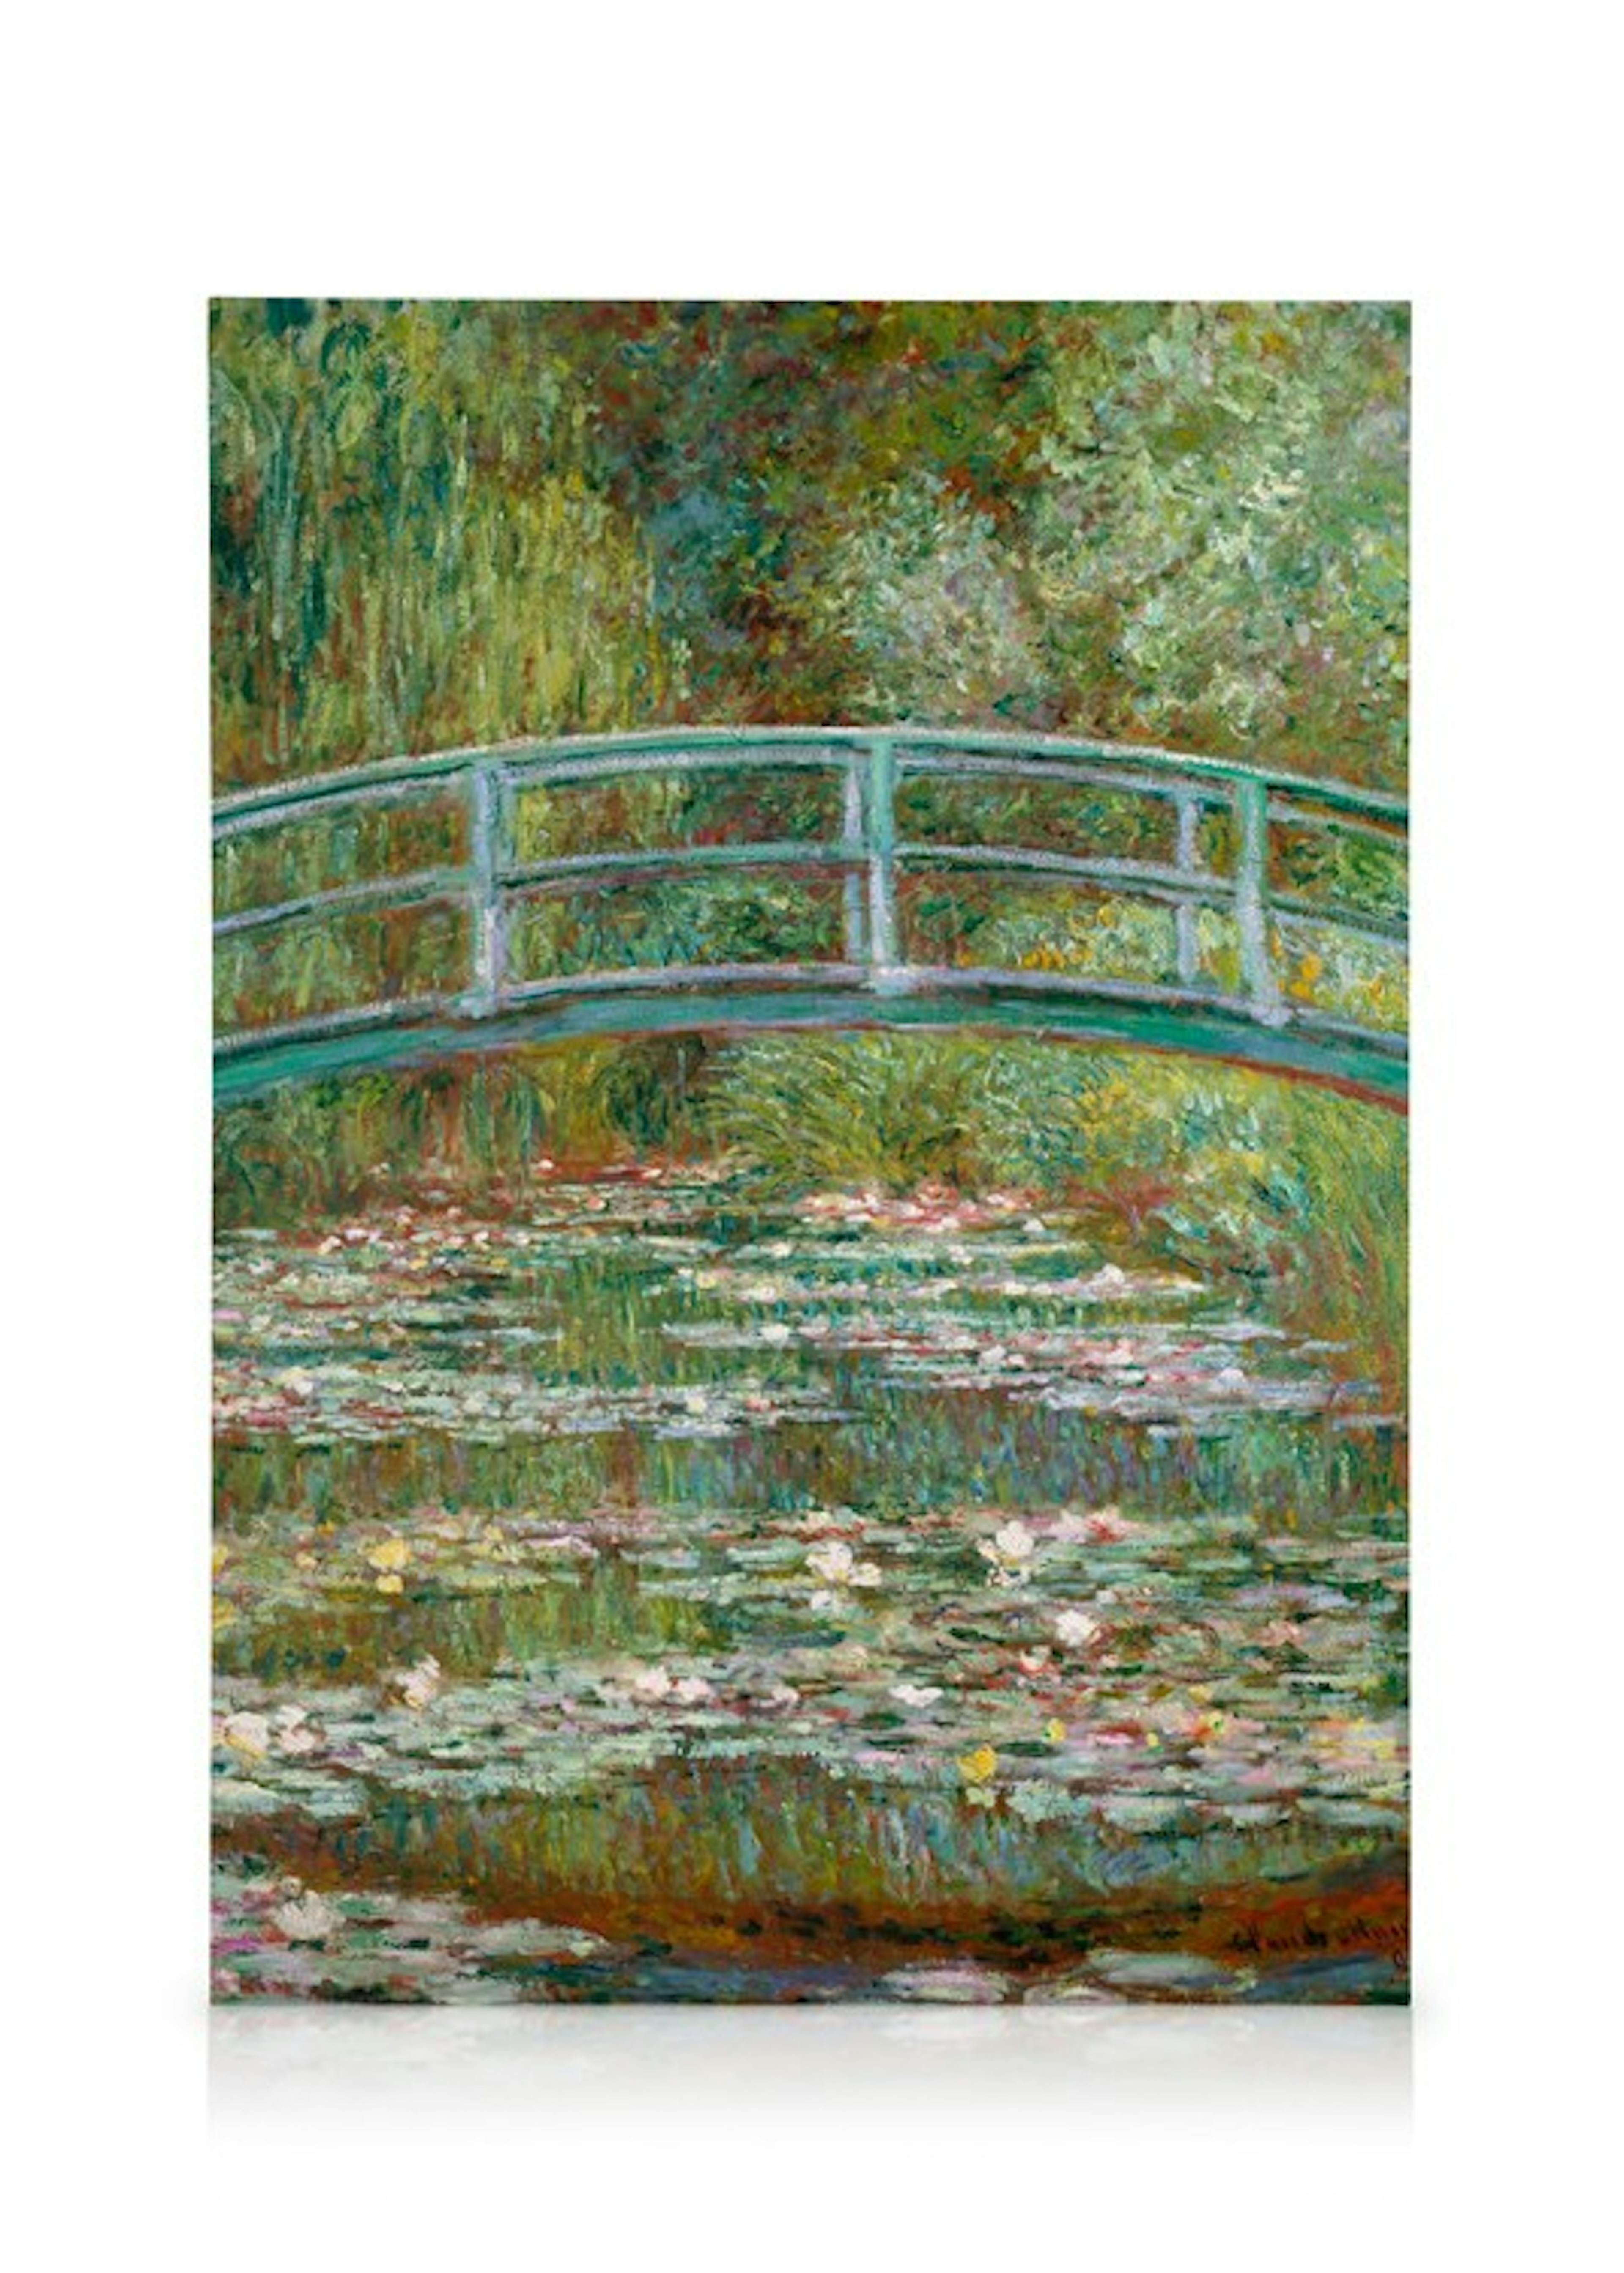 Monet - Bridge over a Pond of Water Lilies Stampa su Tela 0